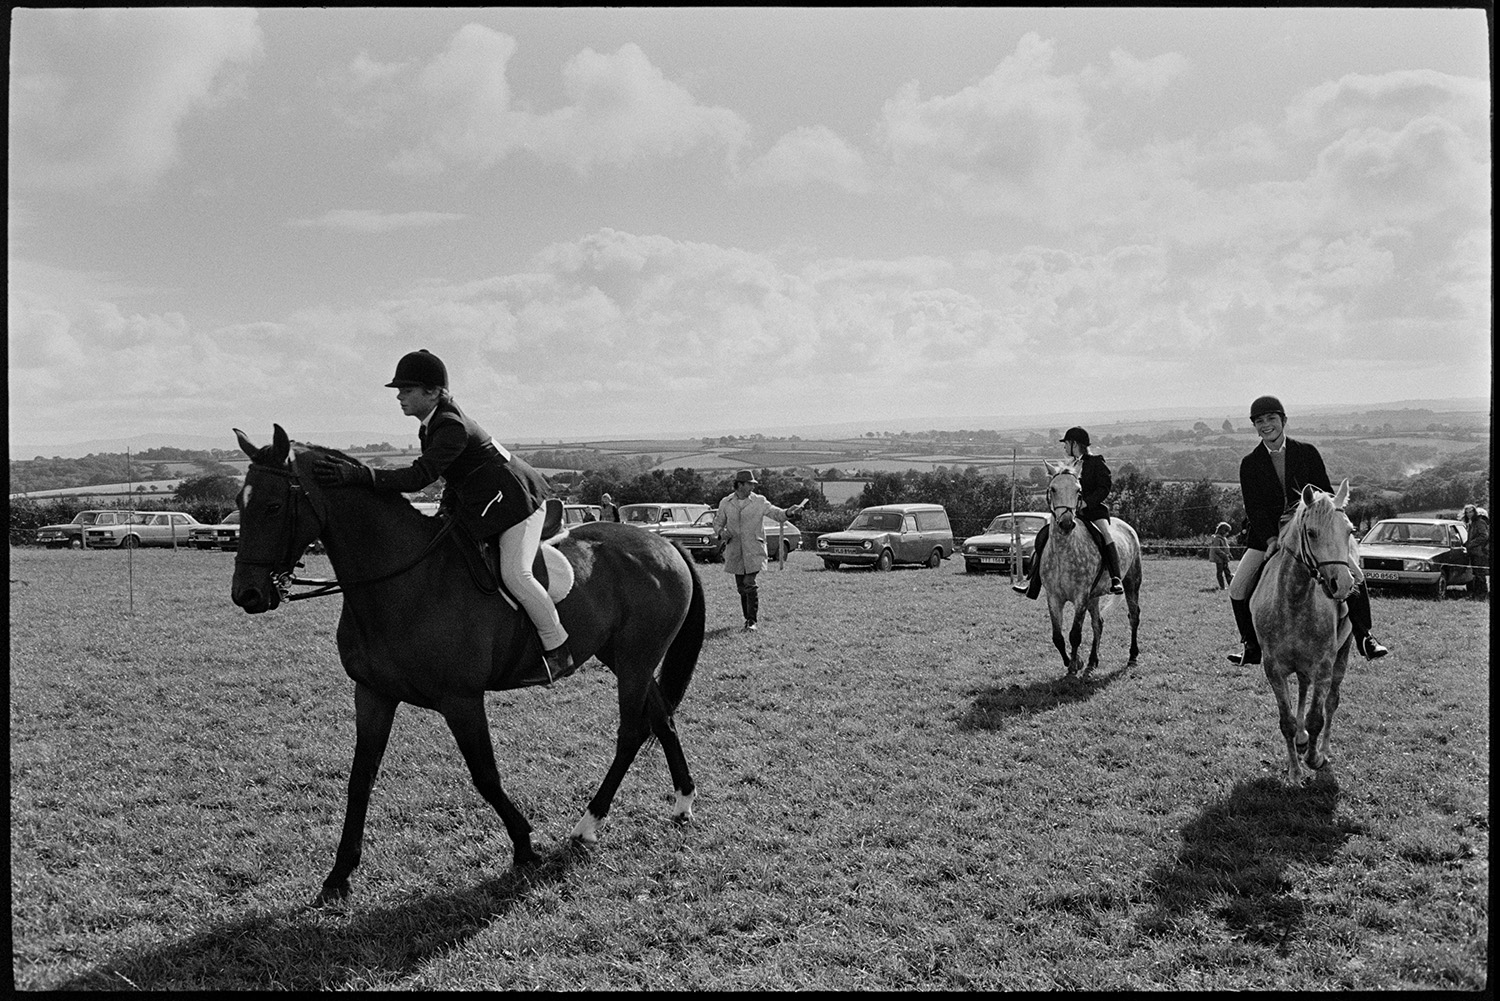 Horses and riders at gymkhana. 
[Three mounted horse riders at Dolton Gymkhana. Parked cars can be seen in the field in the background.]